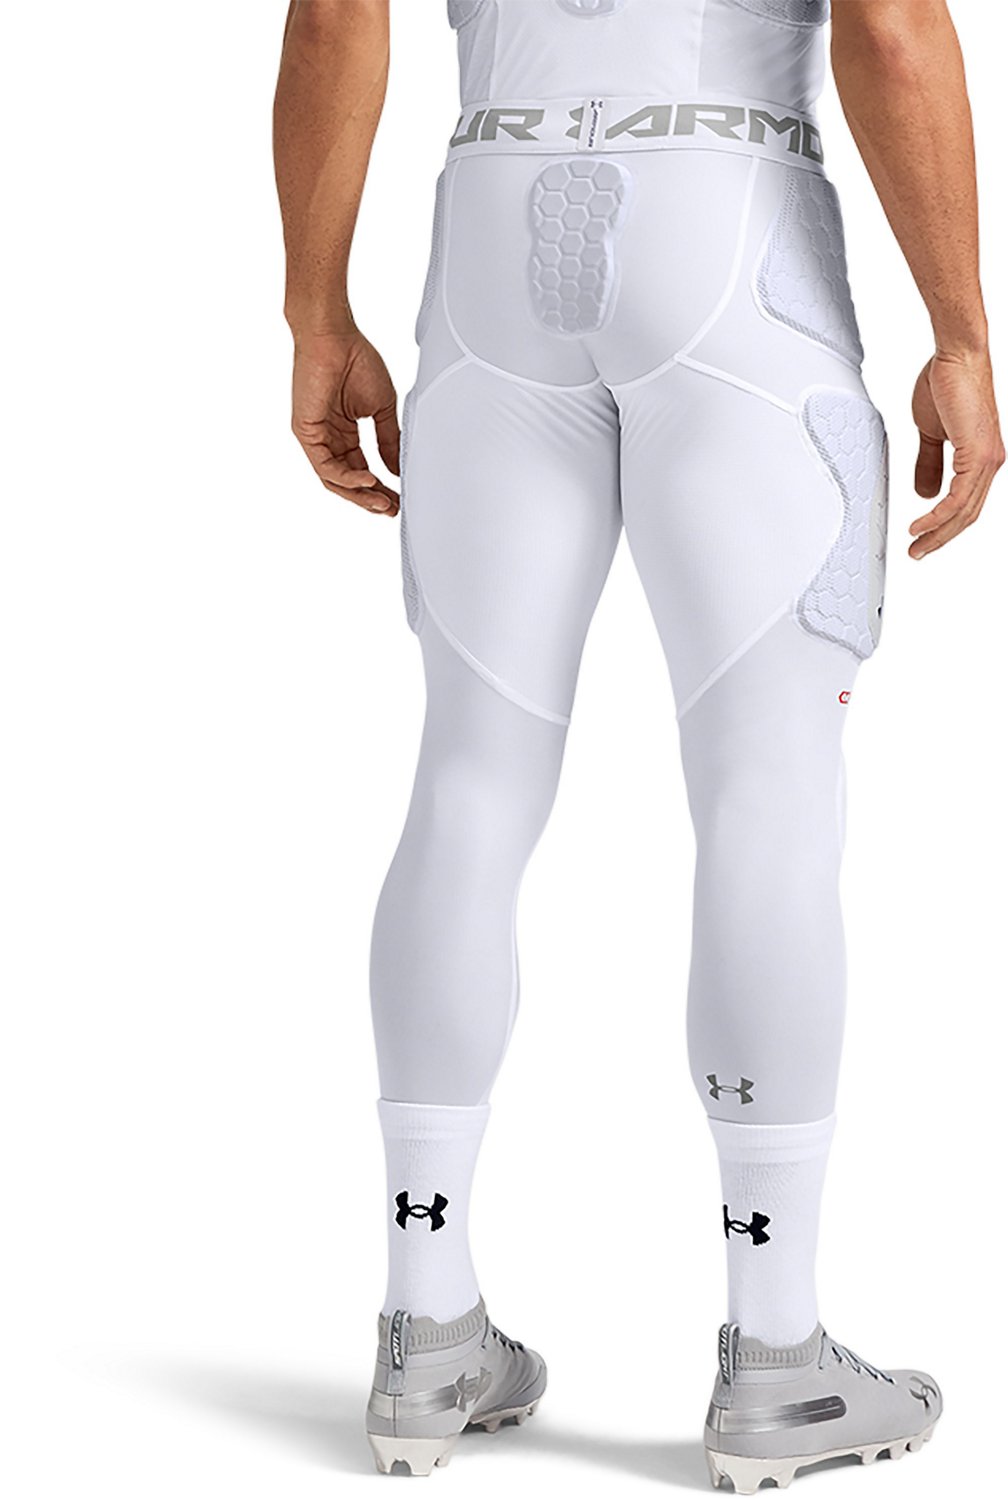 Under Armour Adults' Gameday Armour Pro 7-Pad 3/4-Length Tights